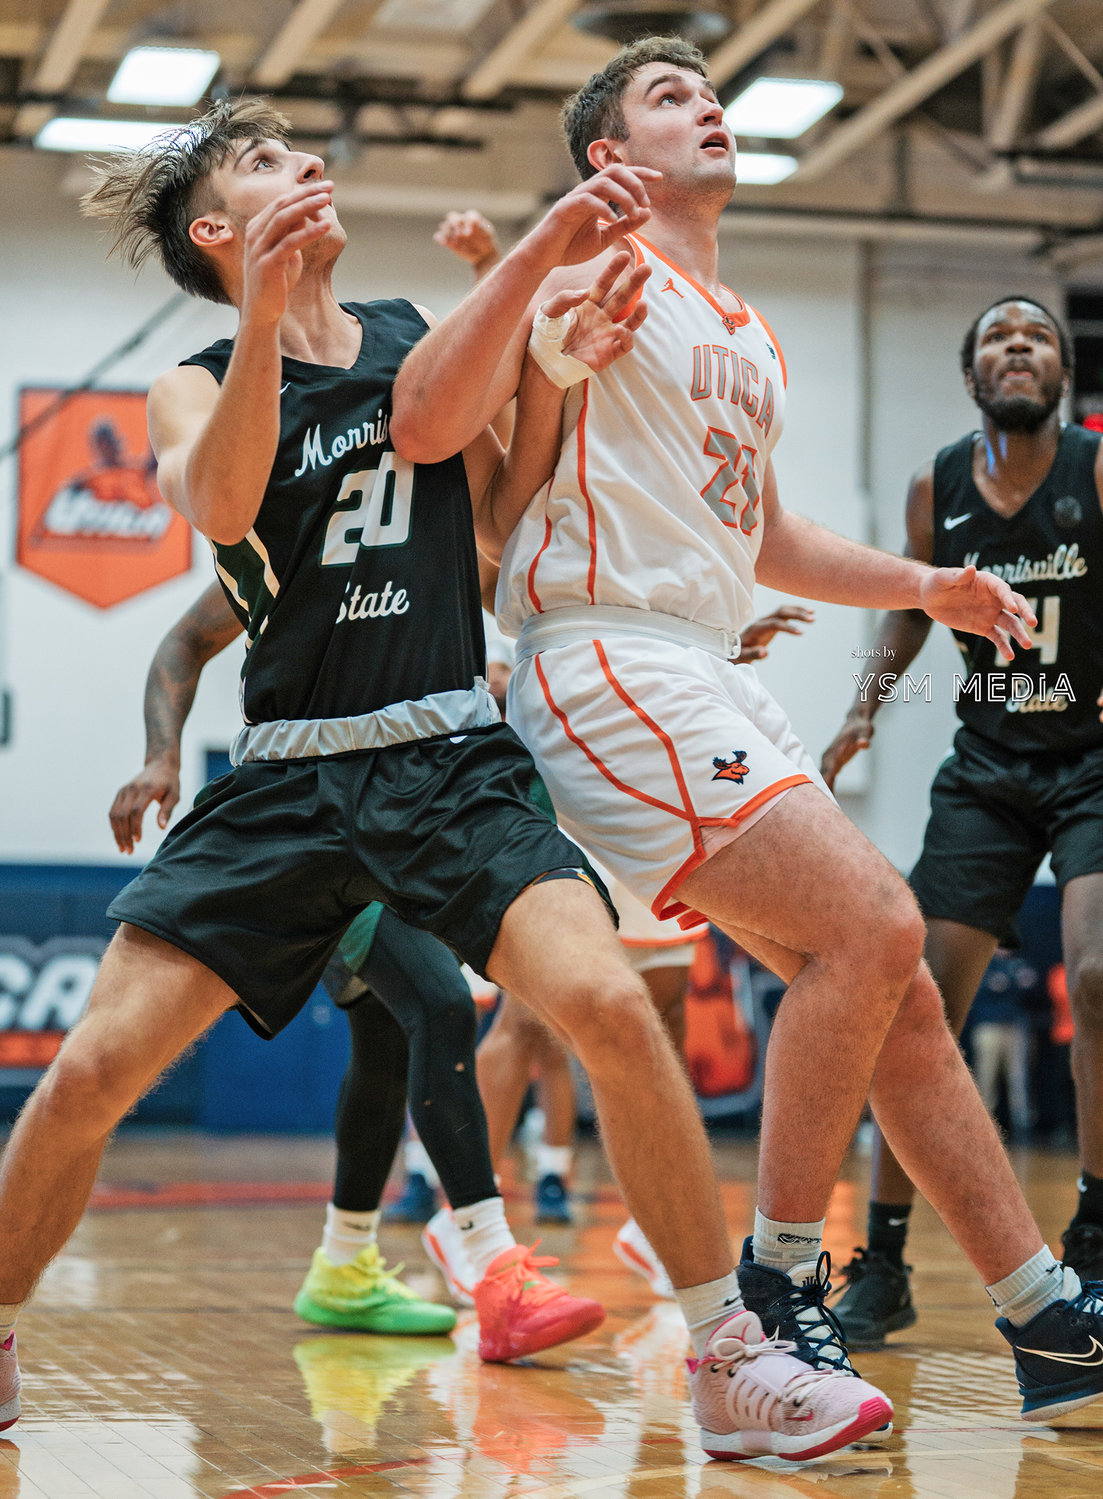 Utica University senior Thomas Morreale, a Whitesboro graduate, boxes out during a game on Nov. 15 against SUNY Morrisville. Morreale is averaging 13.8 points and 6.4 rebounds for the Pioneers.